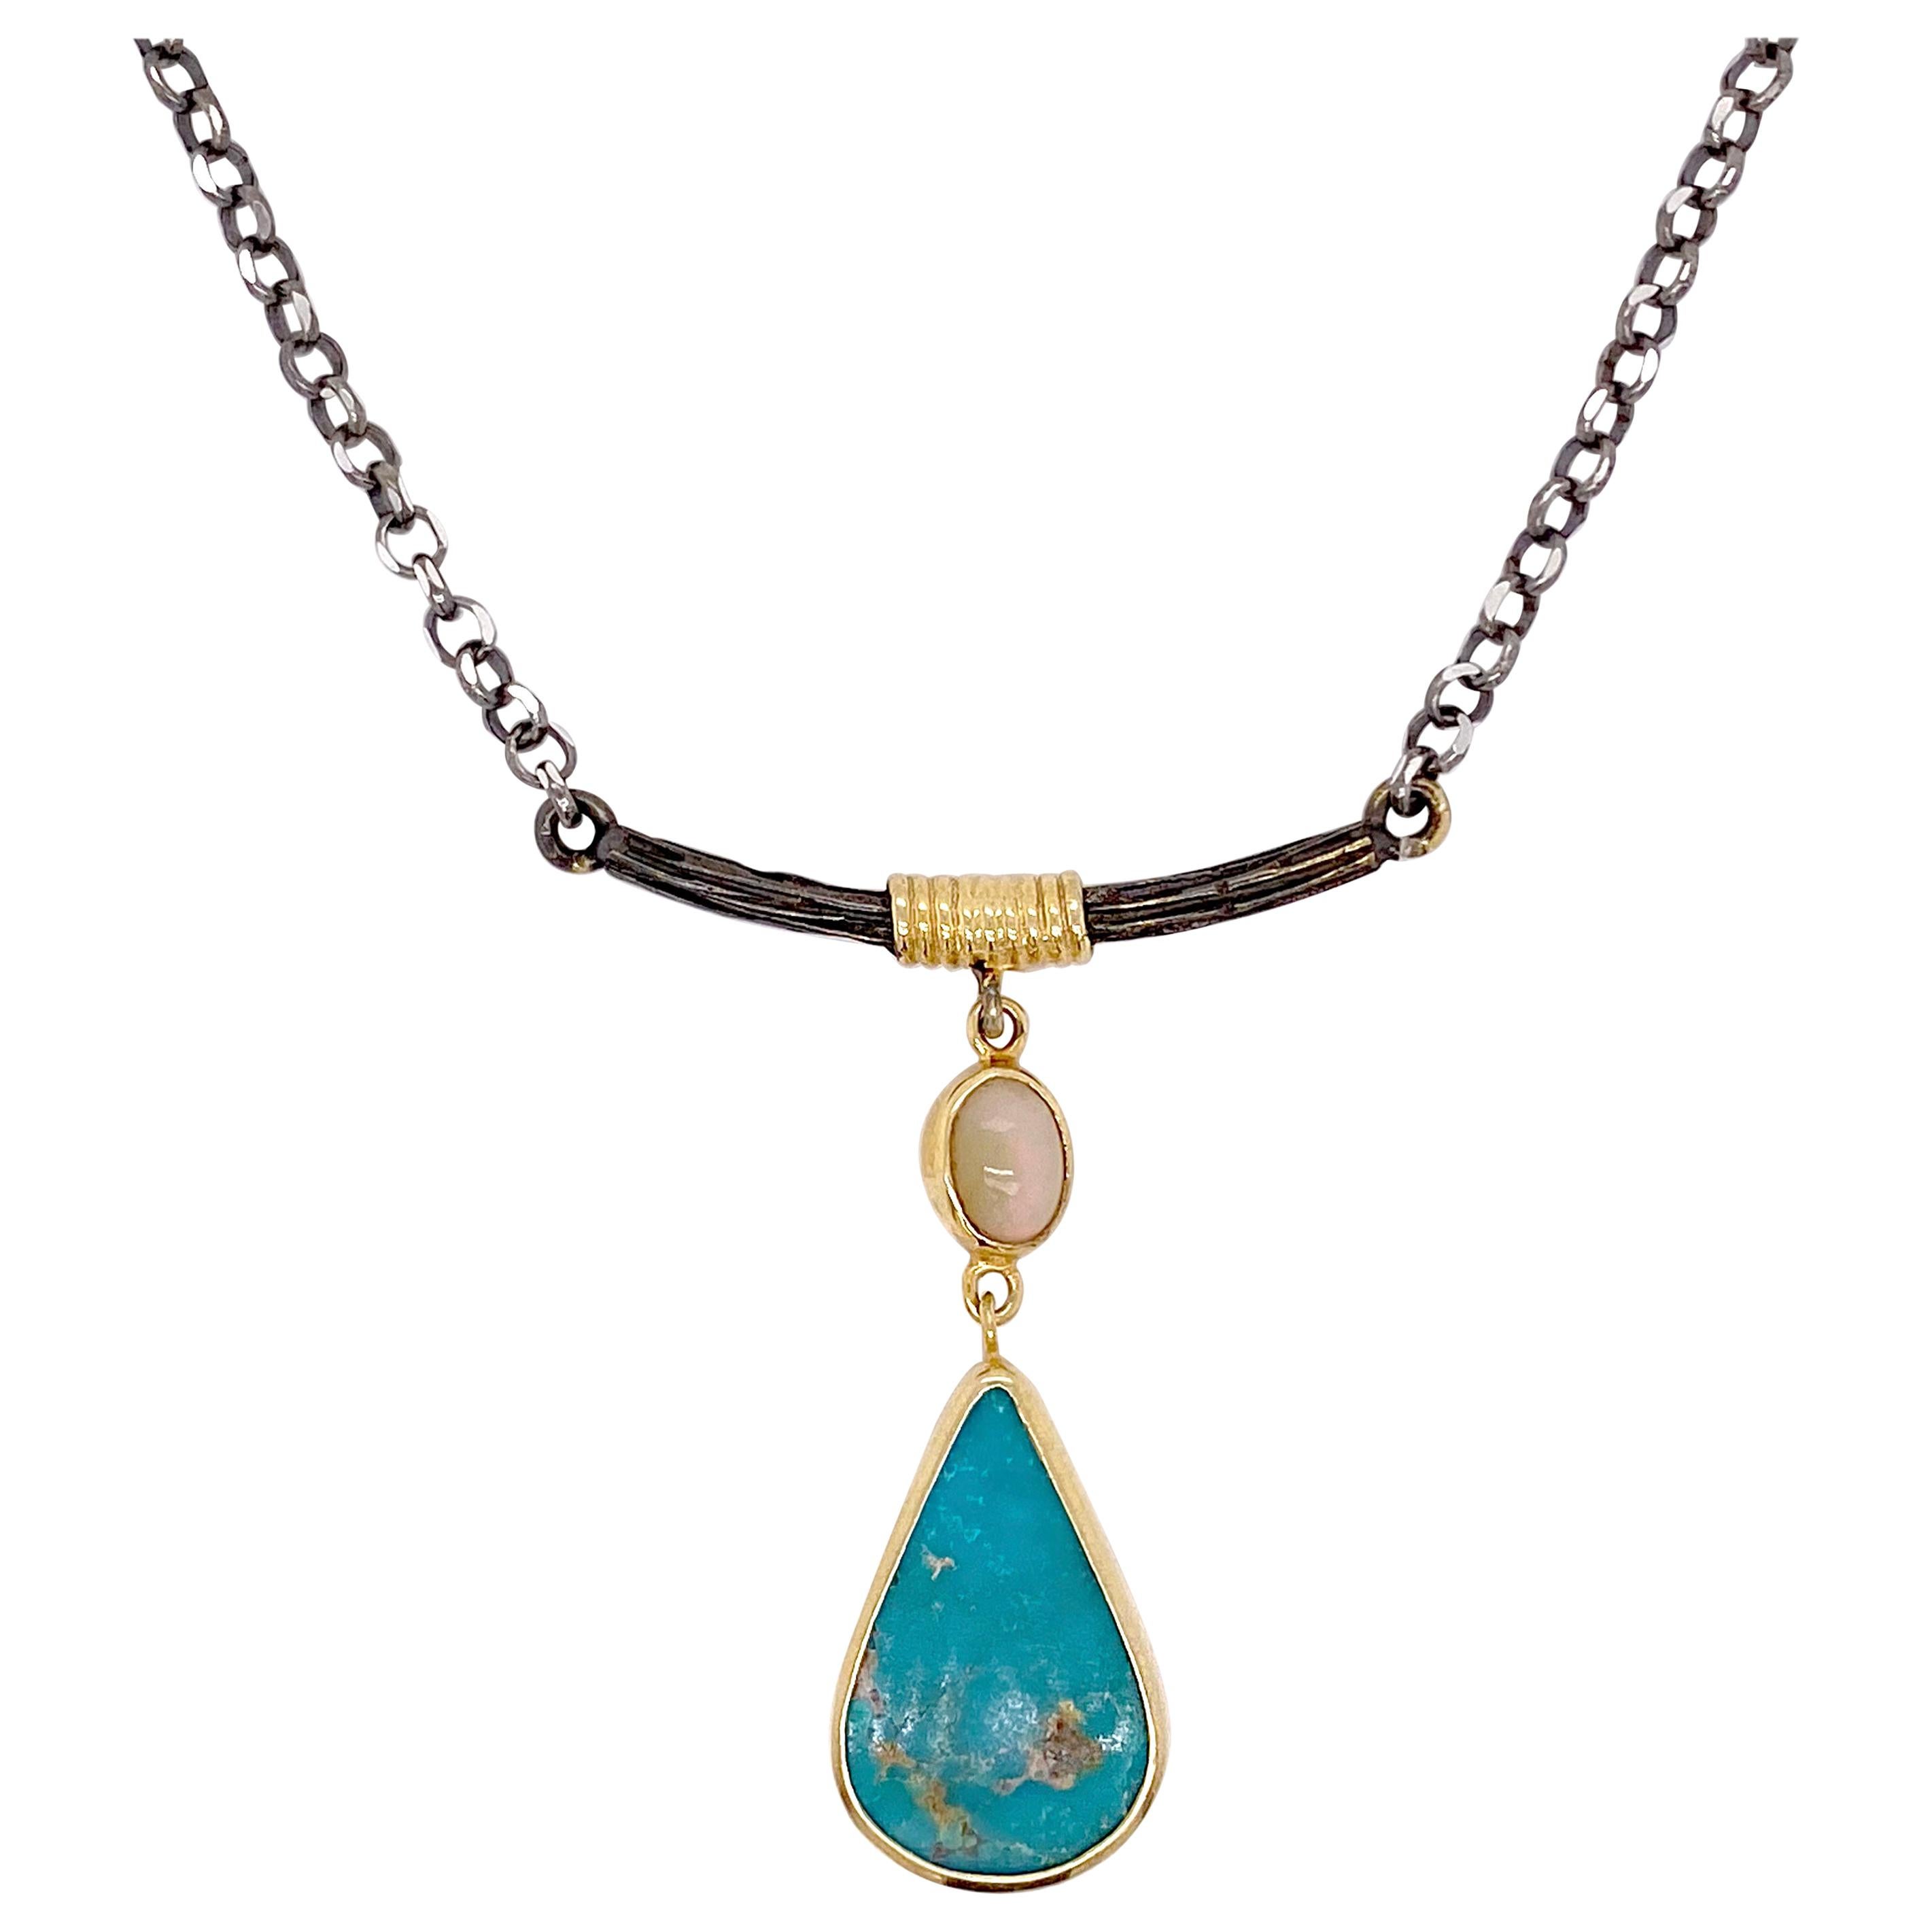 Turquoise and Opal Bar Necklace, Mixed Metal, Handmade Cable Neck Chain